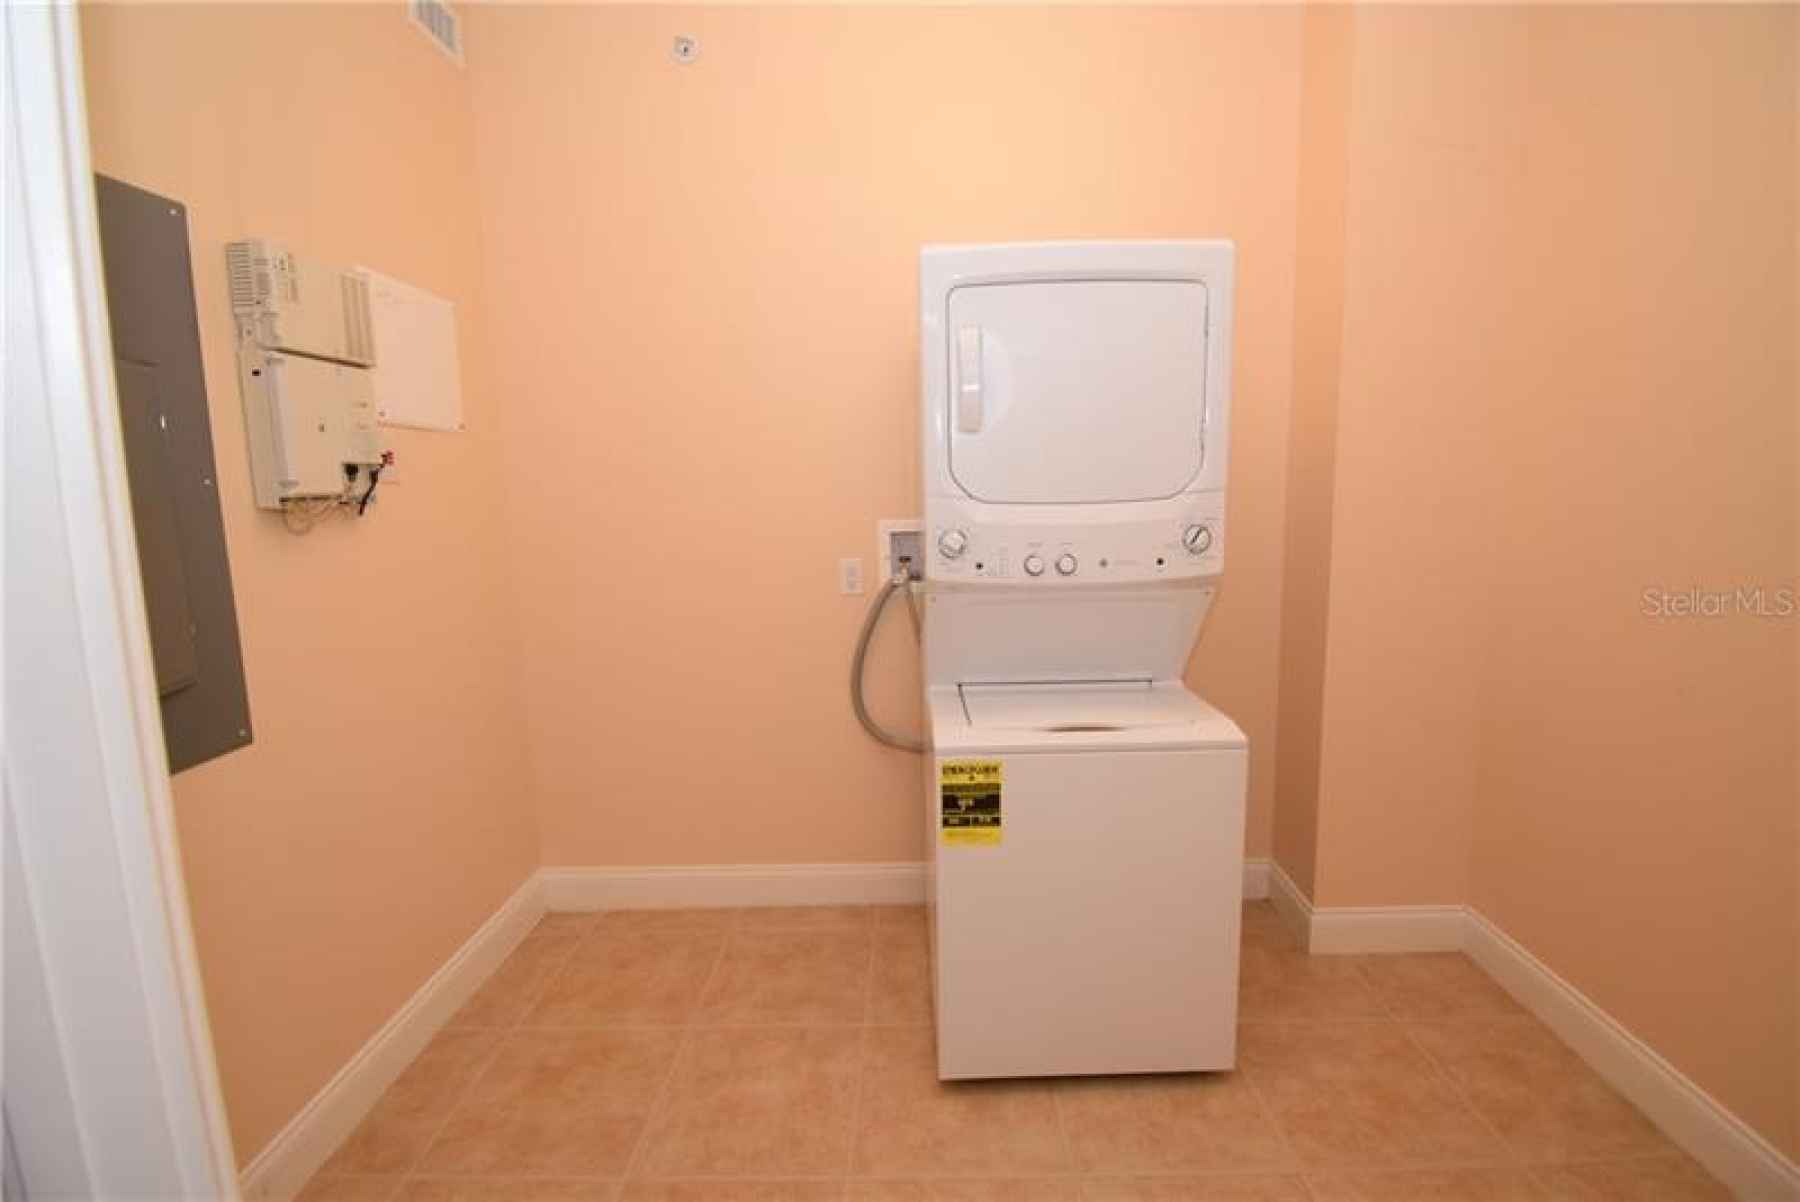 Laundry/utility room. New full size stack washer/dryer.